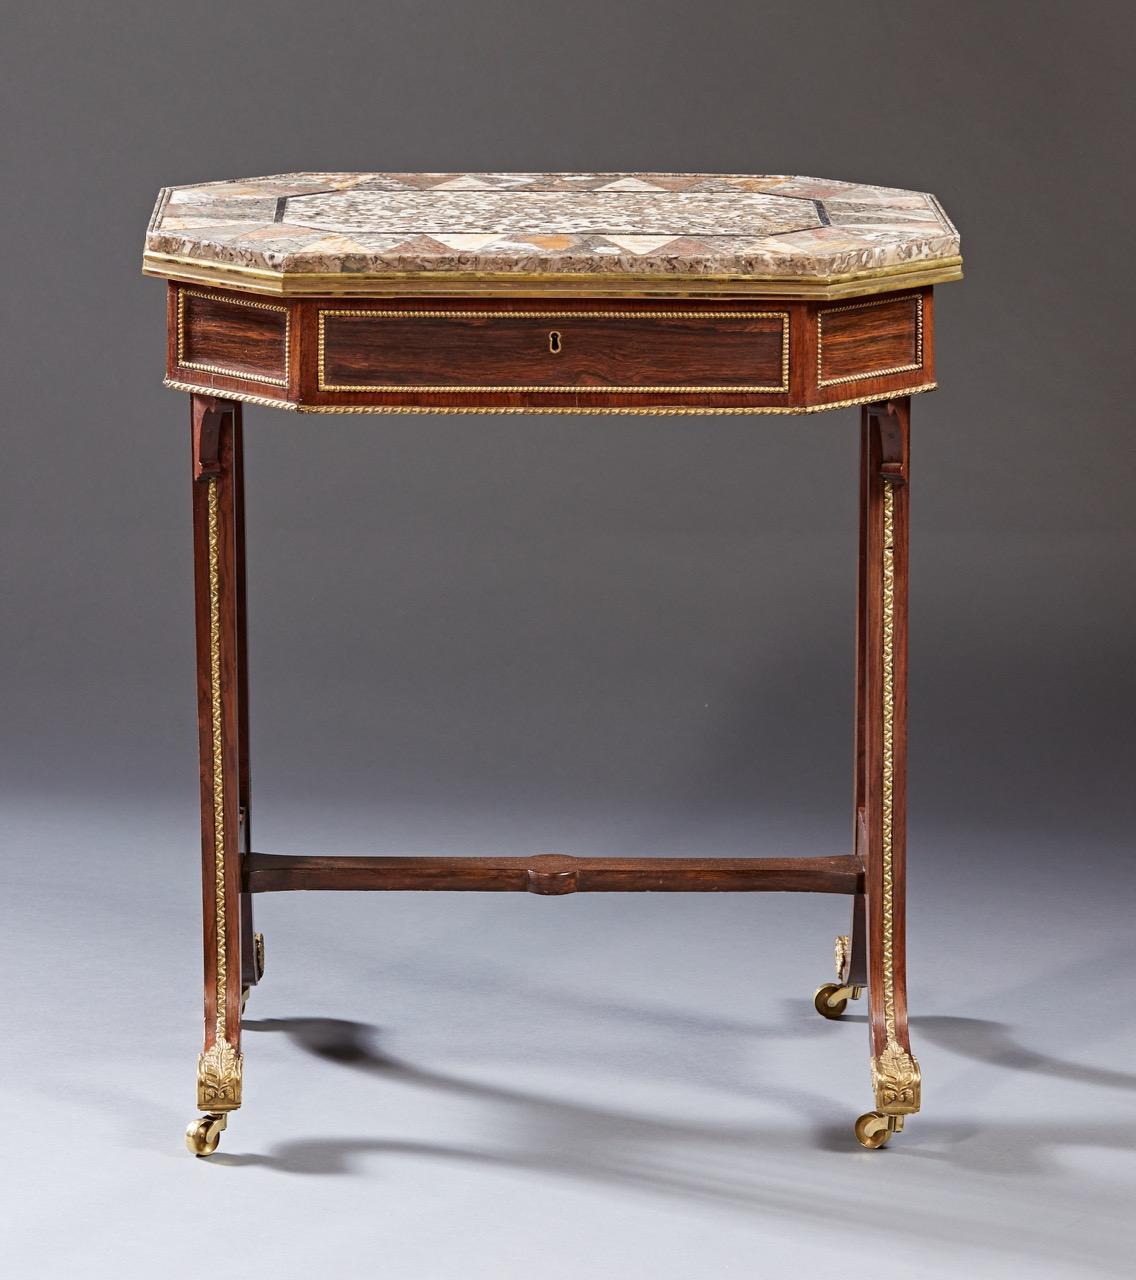 A rare side table attributed to Gillows of London and Lancaster having a specimen inlaid marble top rests on a conforming octagonal shaped case in rosewood with a single drawer on down swept legs. The entire case and legs are mounted with gilt